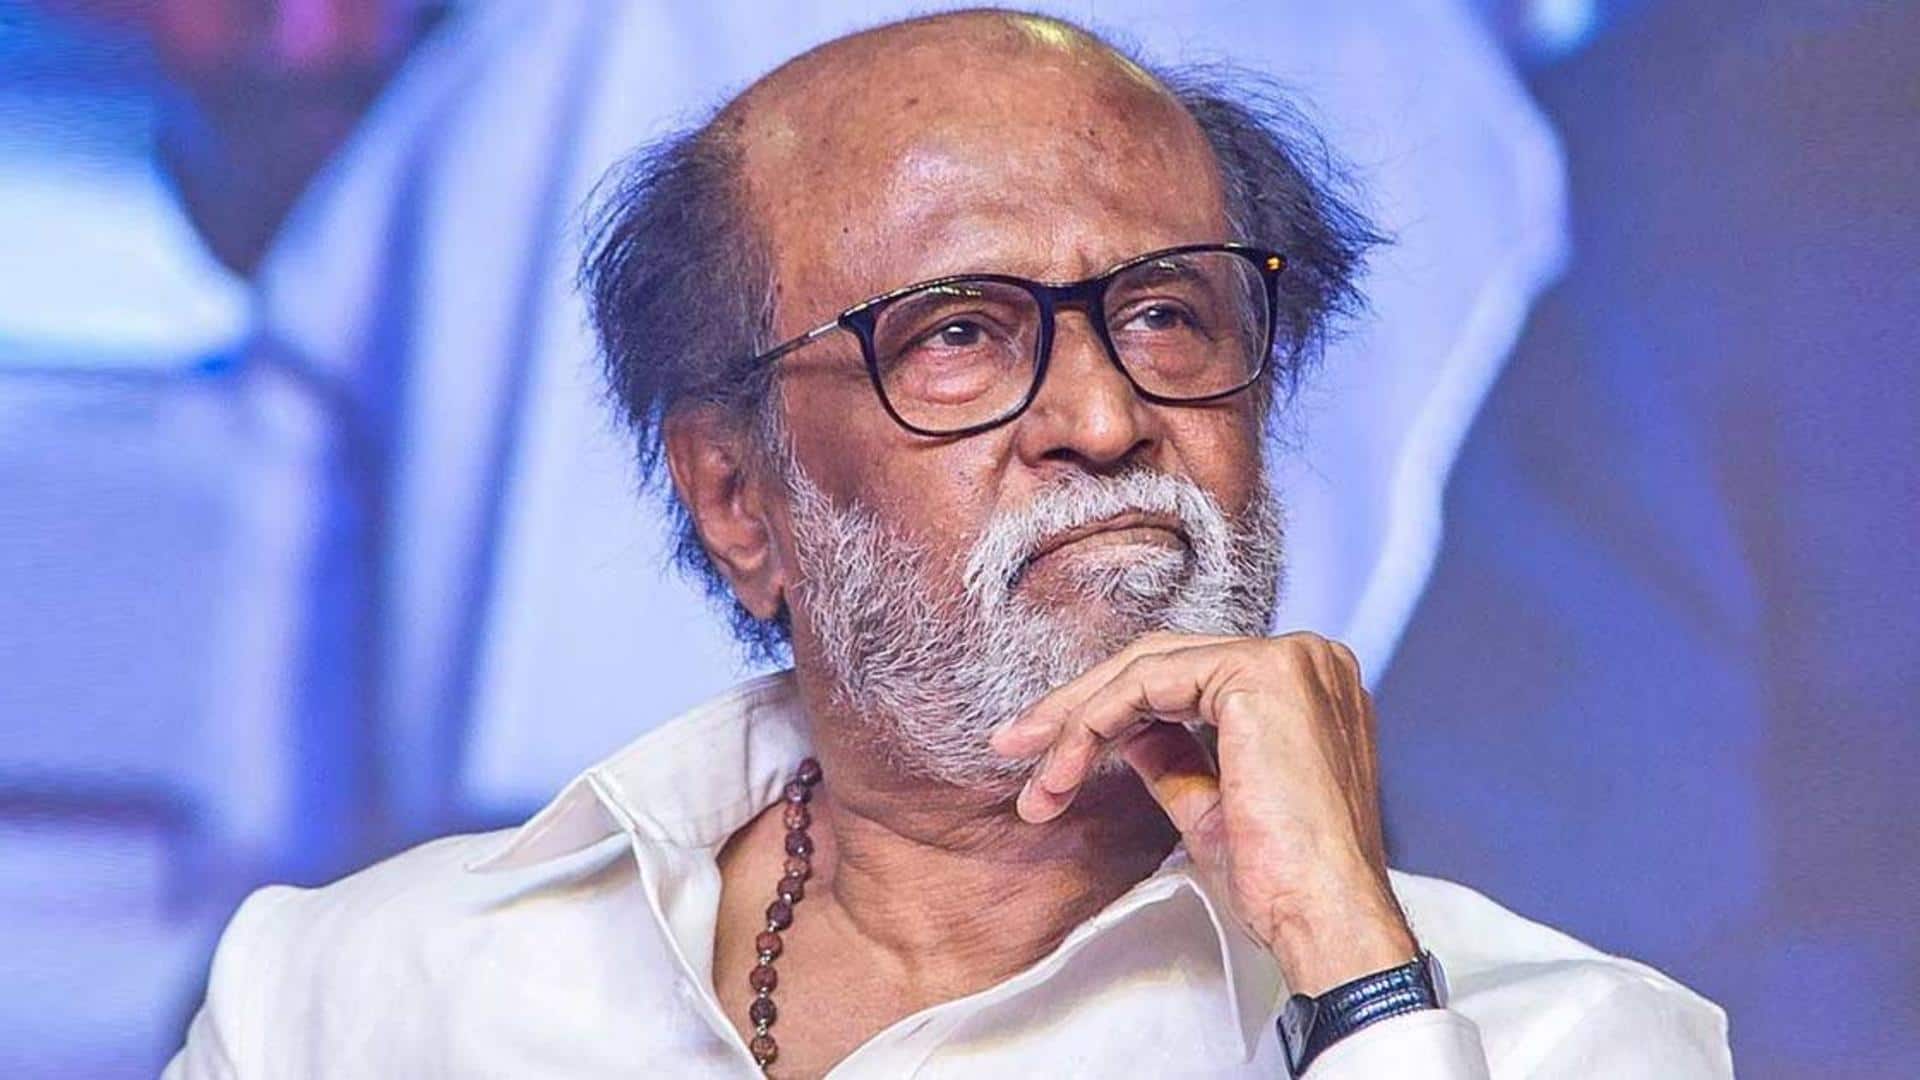 Lyca Productions announces project with Rajinikanth titled '#Thalaivar170'